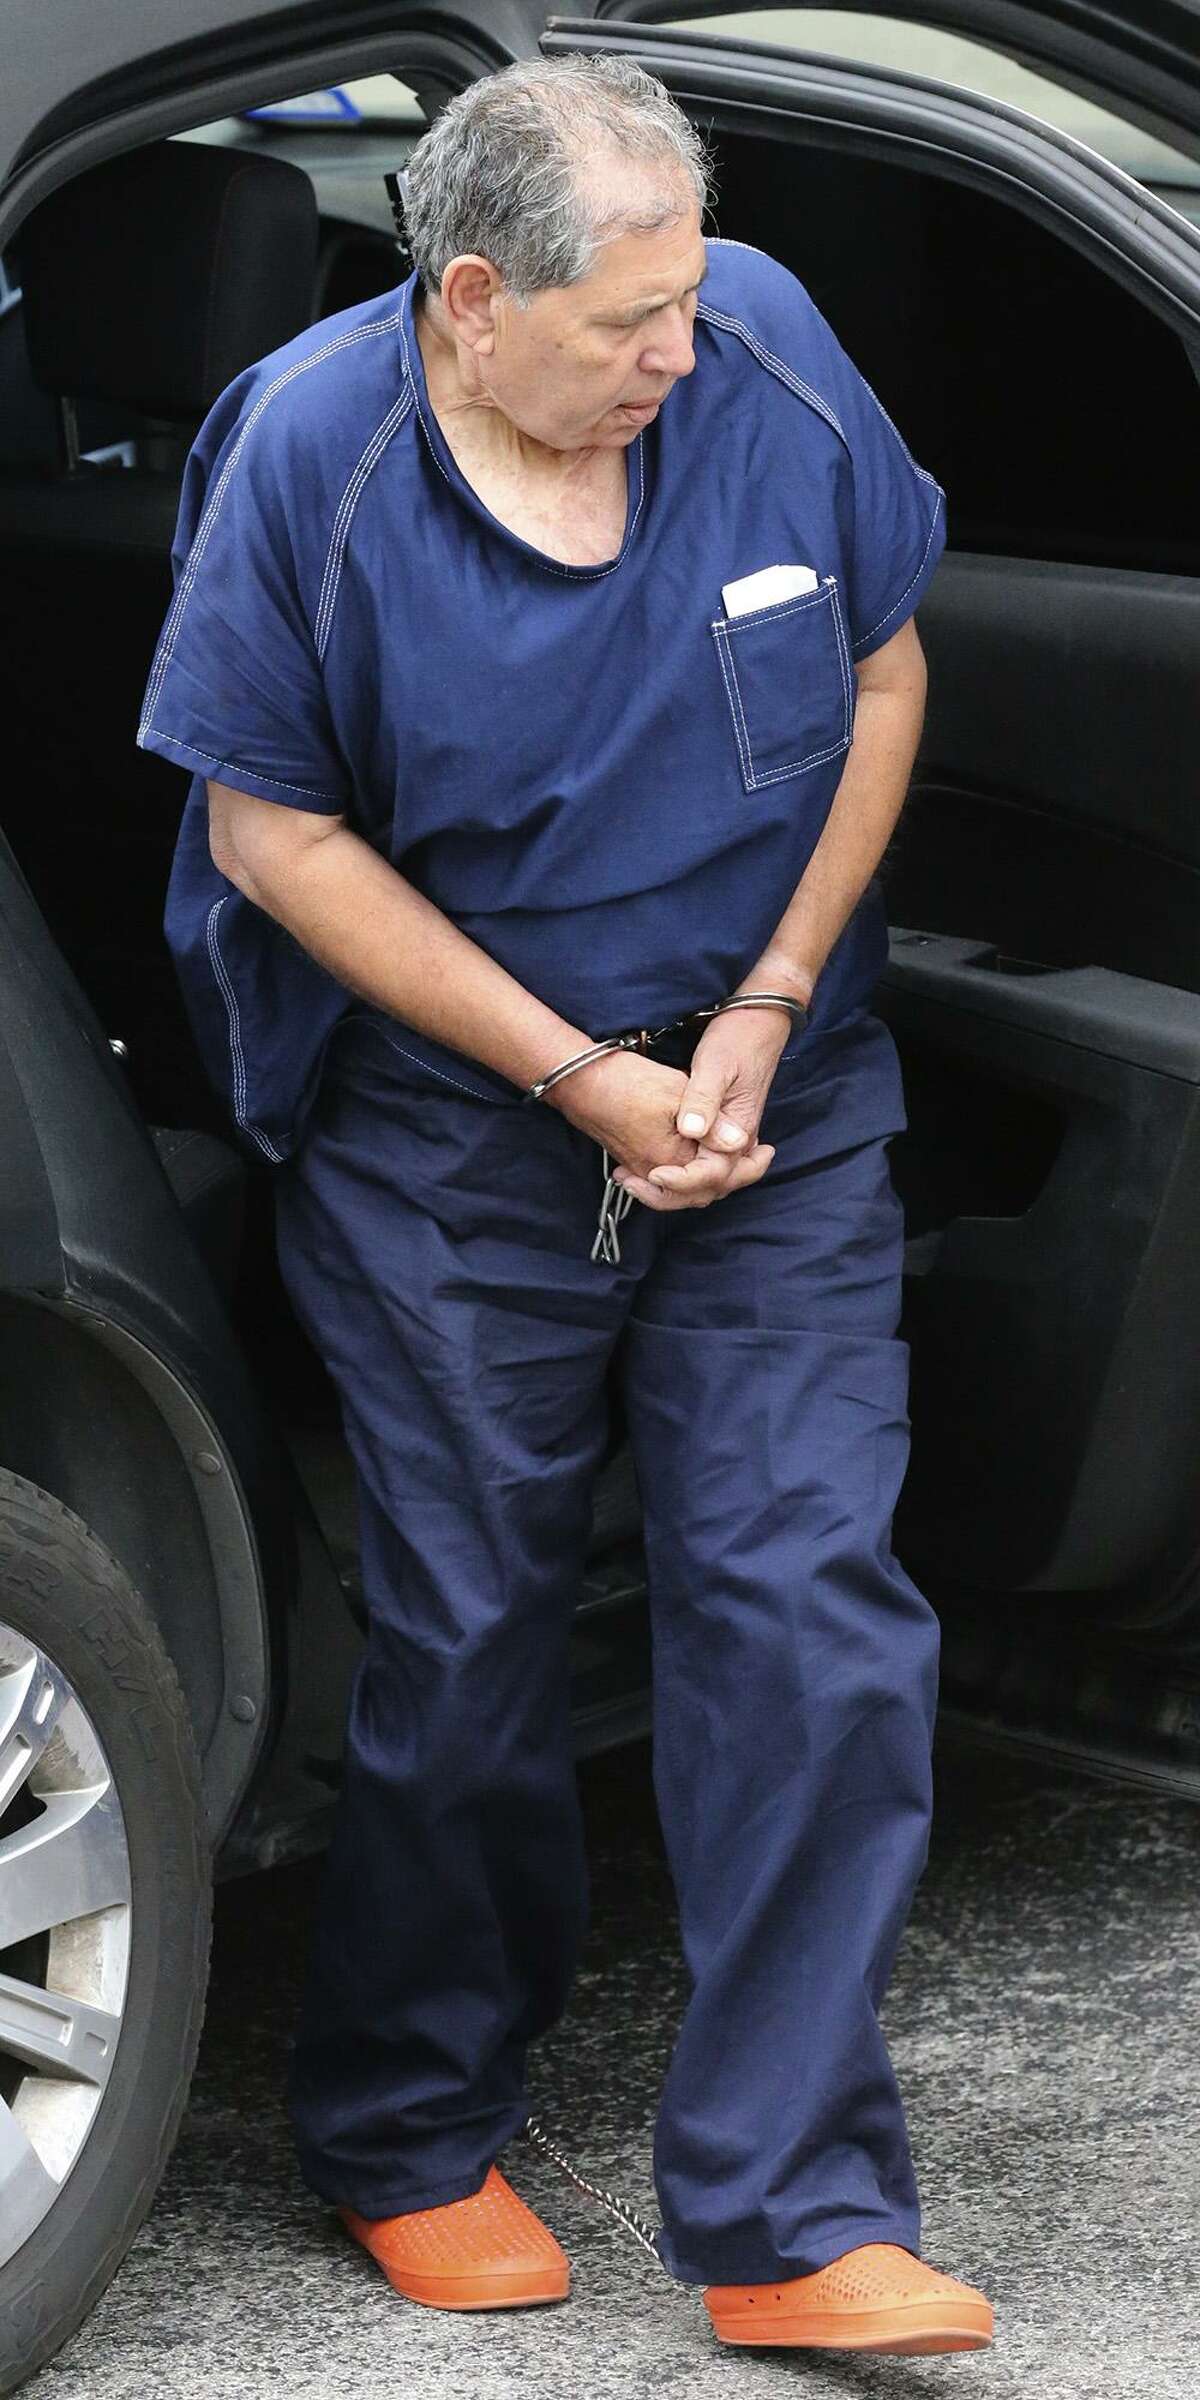 Robert Martinez Gill exits a vehicle Friday February 3, 2017 at the rear of the John H. Wood, Jr. Federal Courthouse. Martinez-Gill, of San Antonio, was sent to prison for life in 1992 after a jury convicted him of possessing heroin and cocaine with intent to distribute. He sought repeatedly over the years to have his sentence overturned.